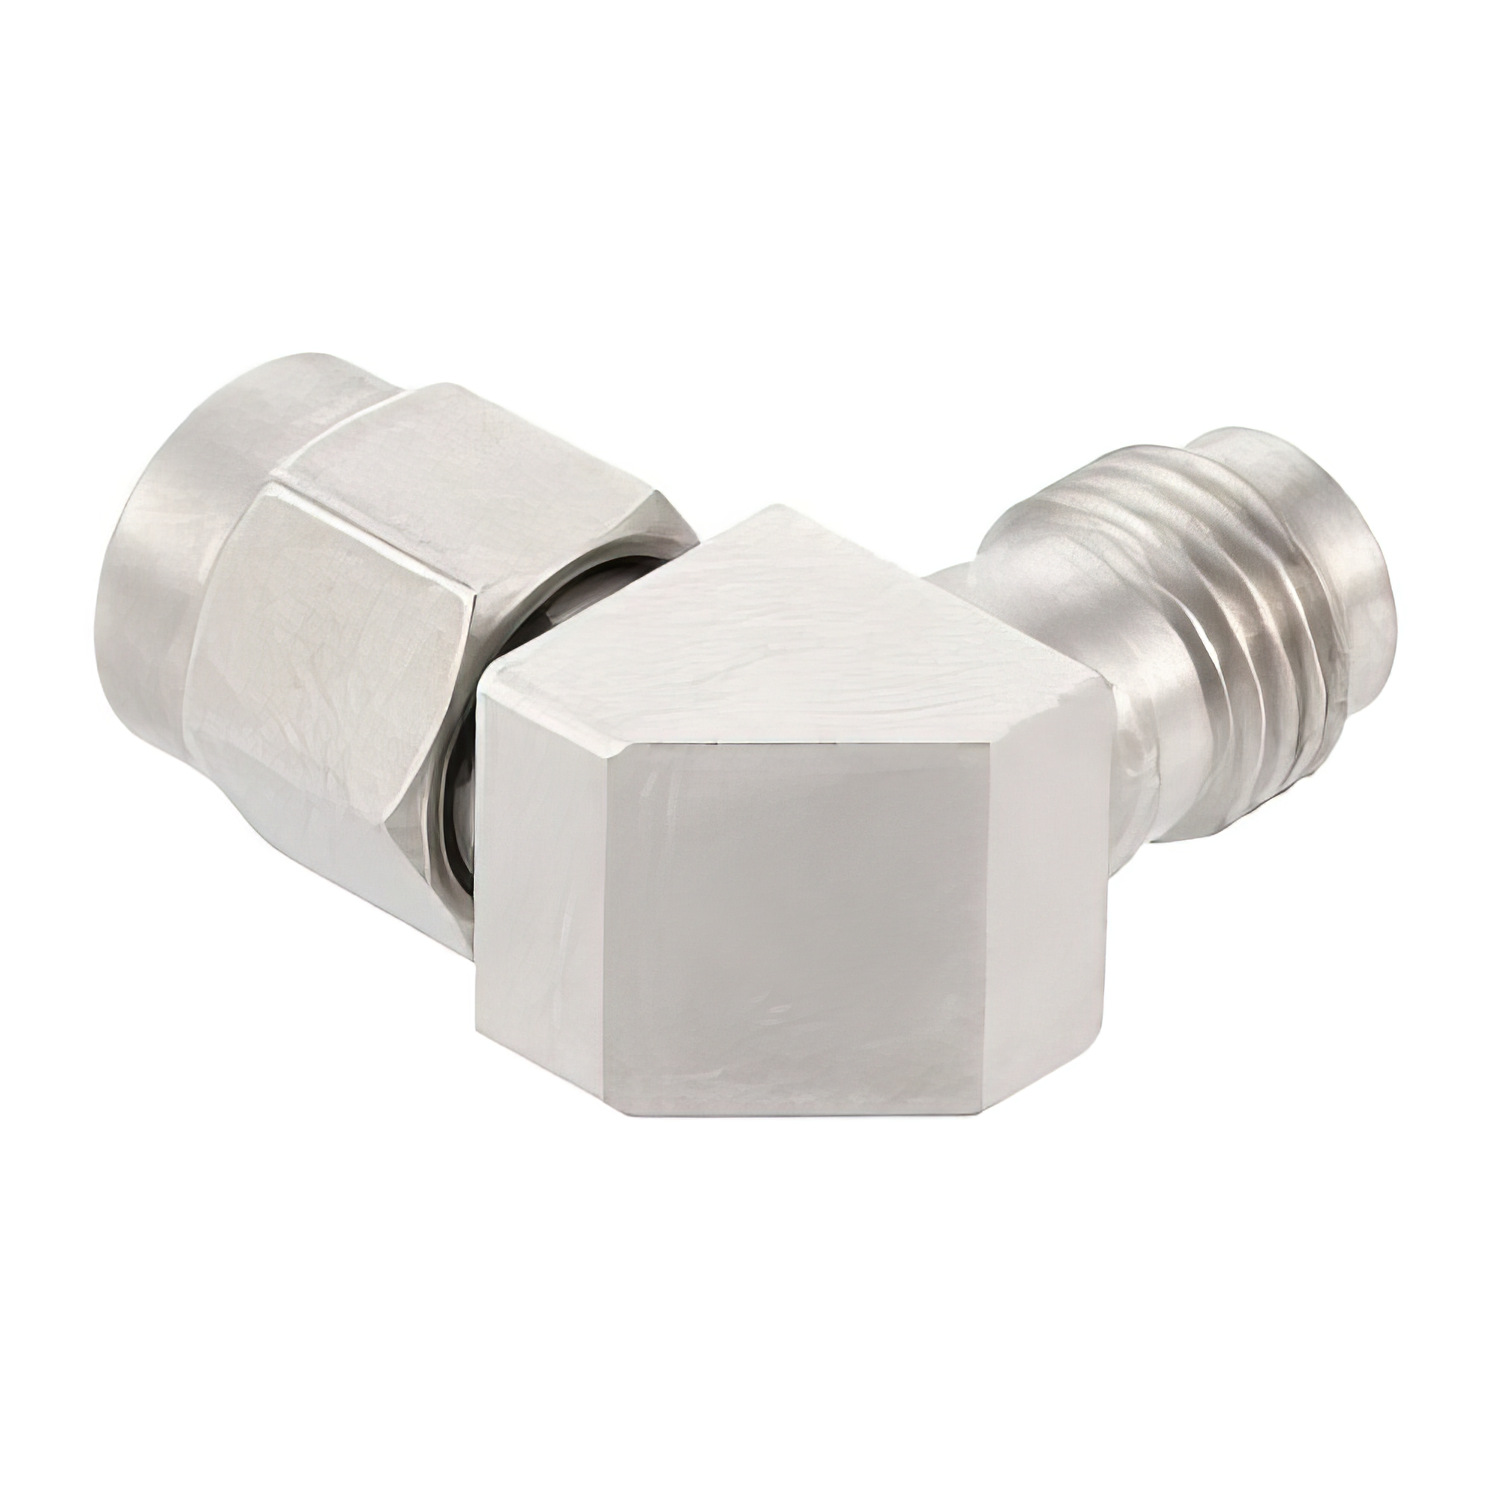 1.85mm Female to 2.92mm Male Miter Right Angle Adapter1